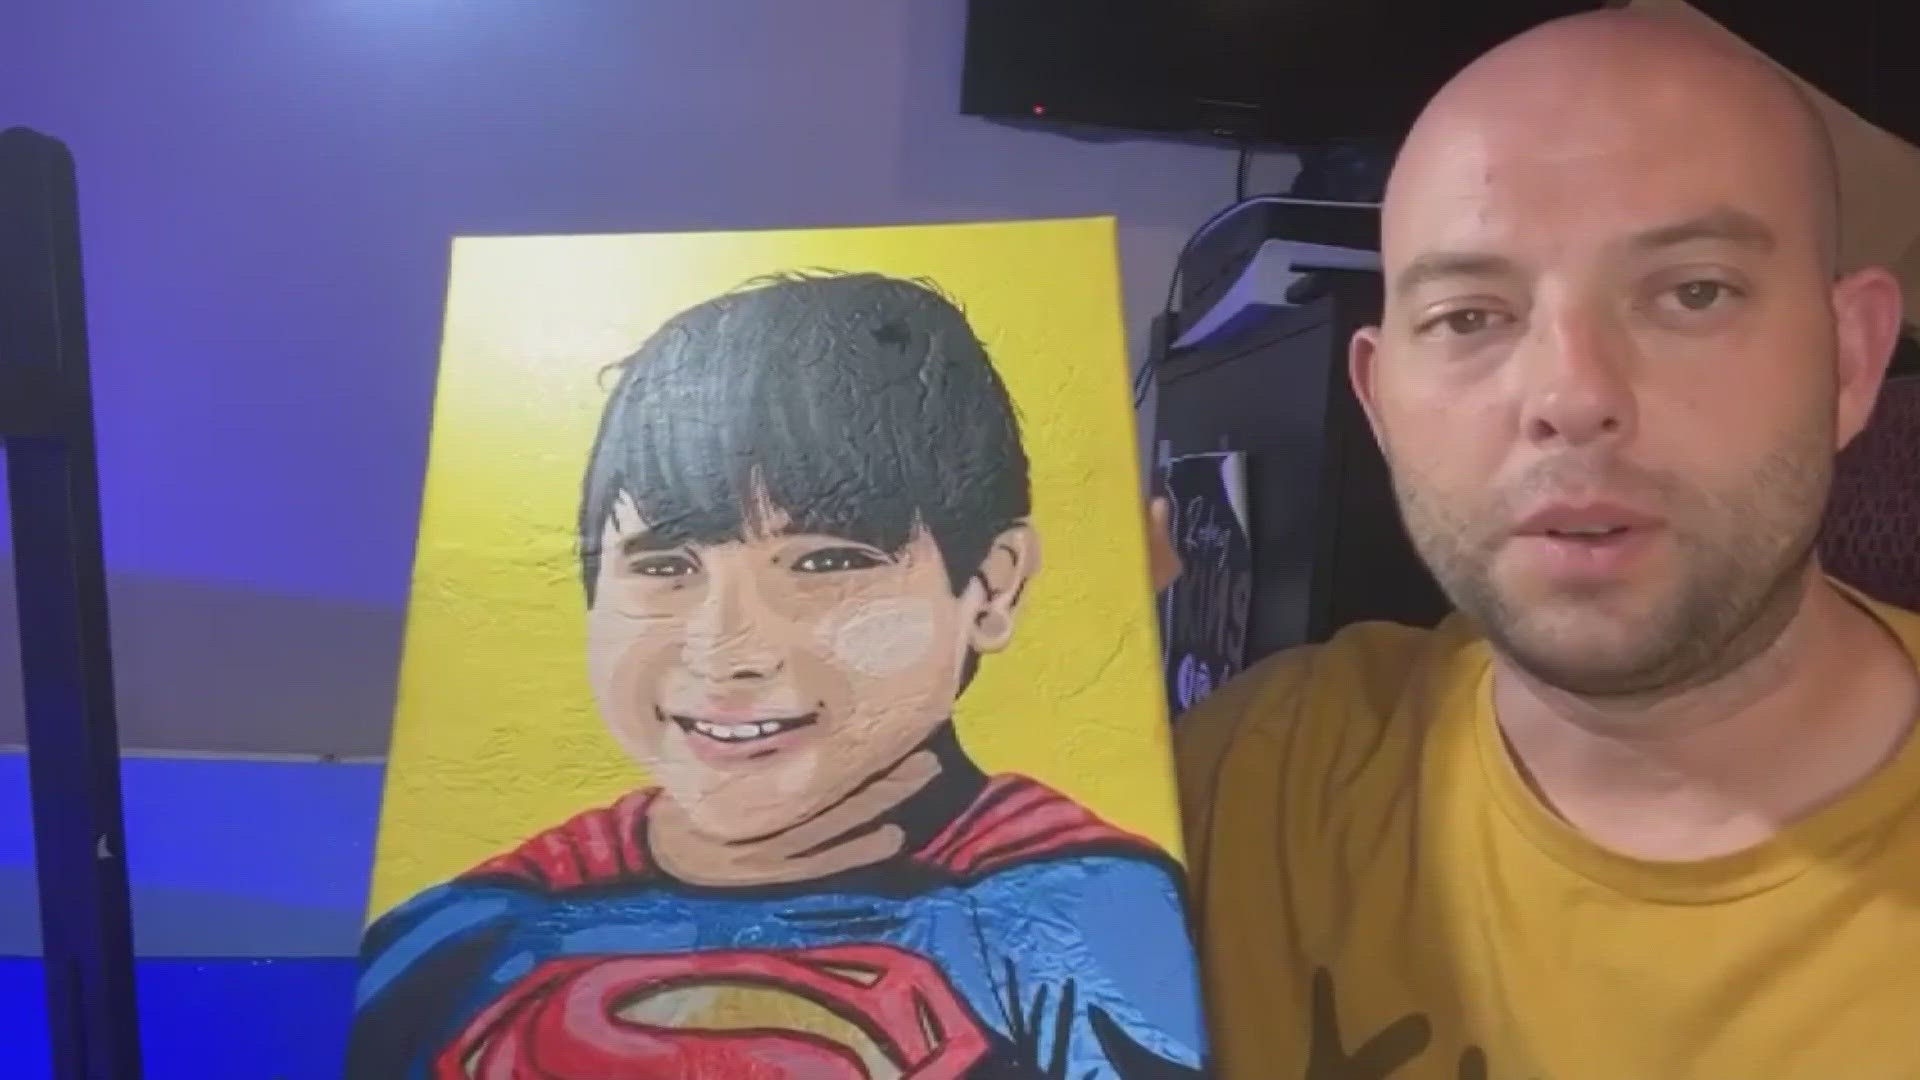 Javier Adrian Flores Fajardo loved school, soccer, and Superman. He's now a true hero to several families through organ donation.